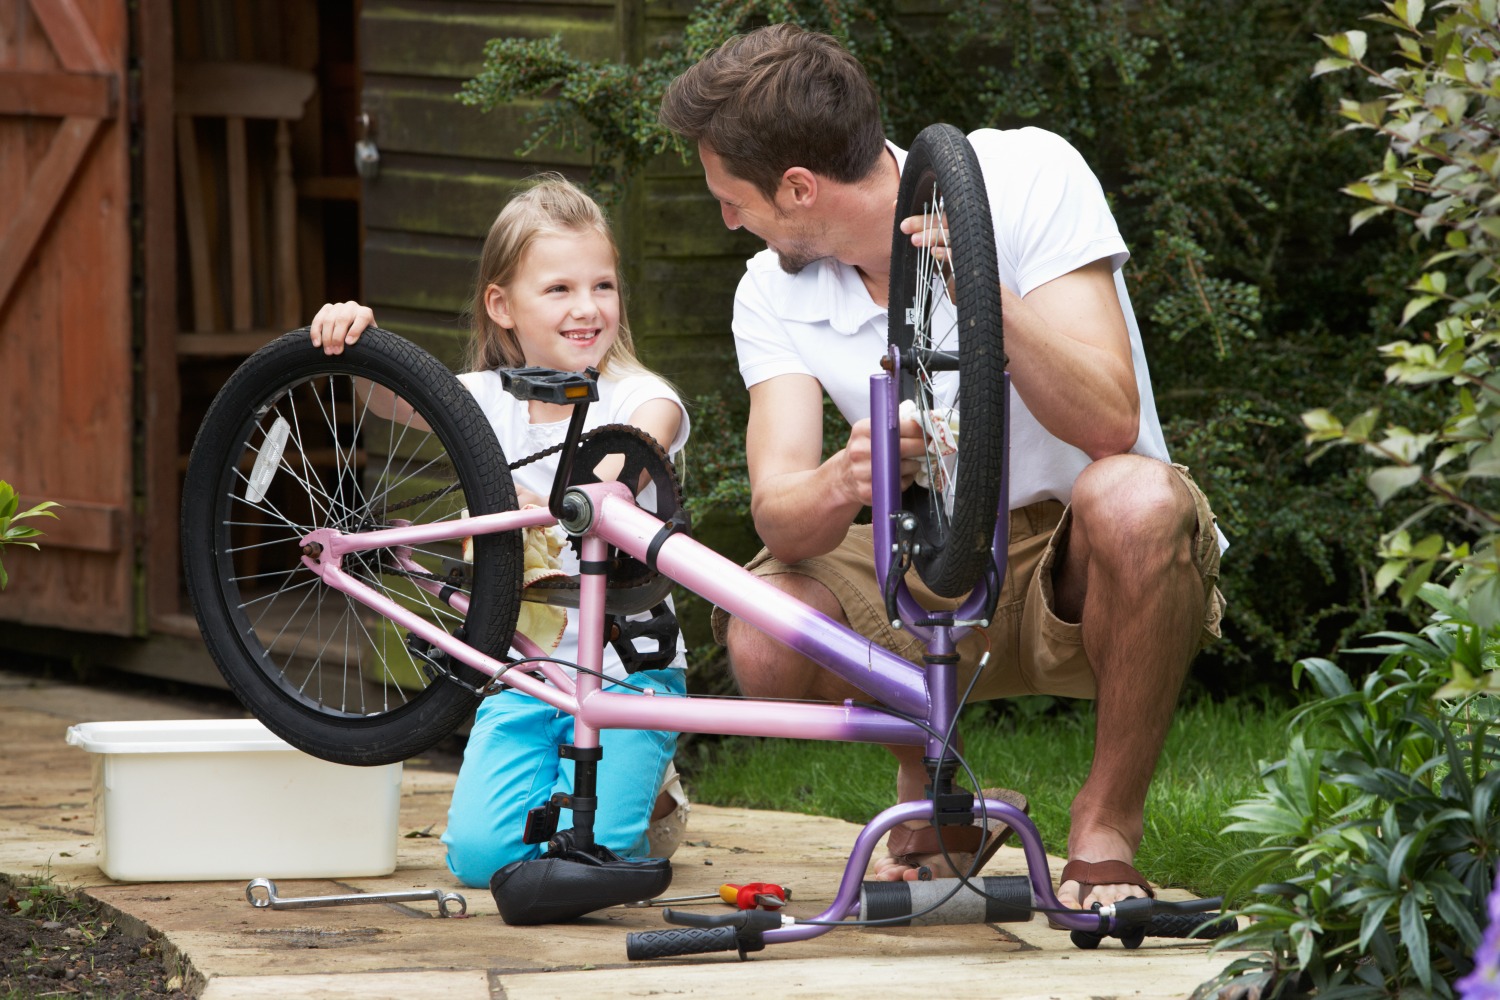 dad and daughter cleaning a kids bike